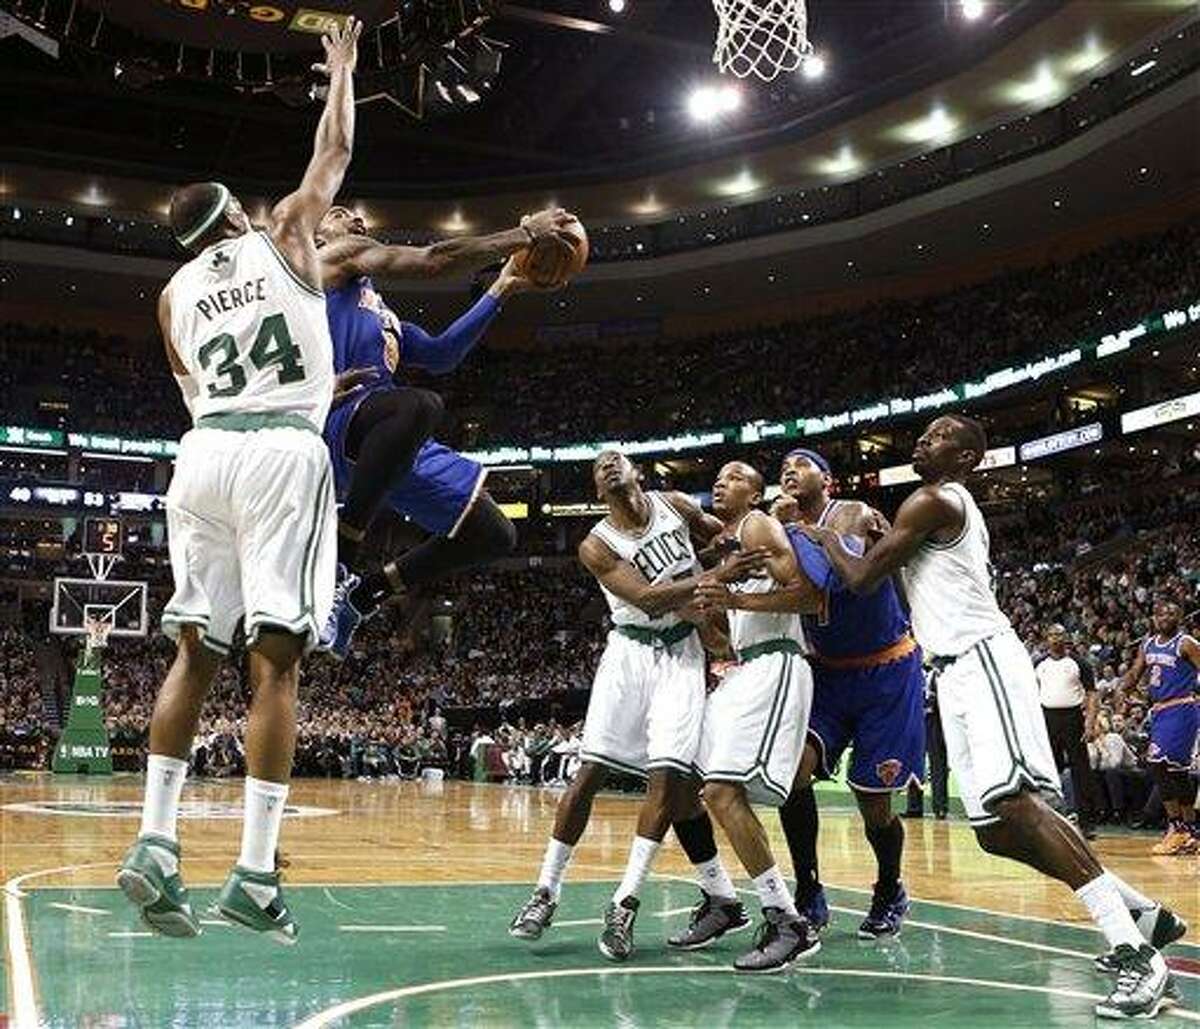 New York Knicks' J.R. Smith (8) drives to the basket past Boston Celtics' Paul Pierce (34) as Jordan Crawford, right, Avery Bradley, and Jeff Green, left, fight Knicks' Carmelo Anthony for position during the second quarter of a, NBA basketball game in Boston, Tuesday, March 26, 2013. (AP Photo/Winslow Townson)